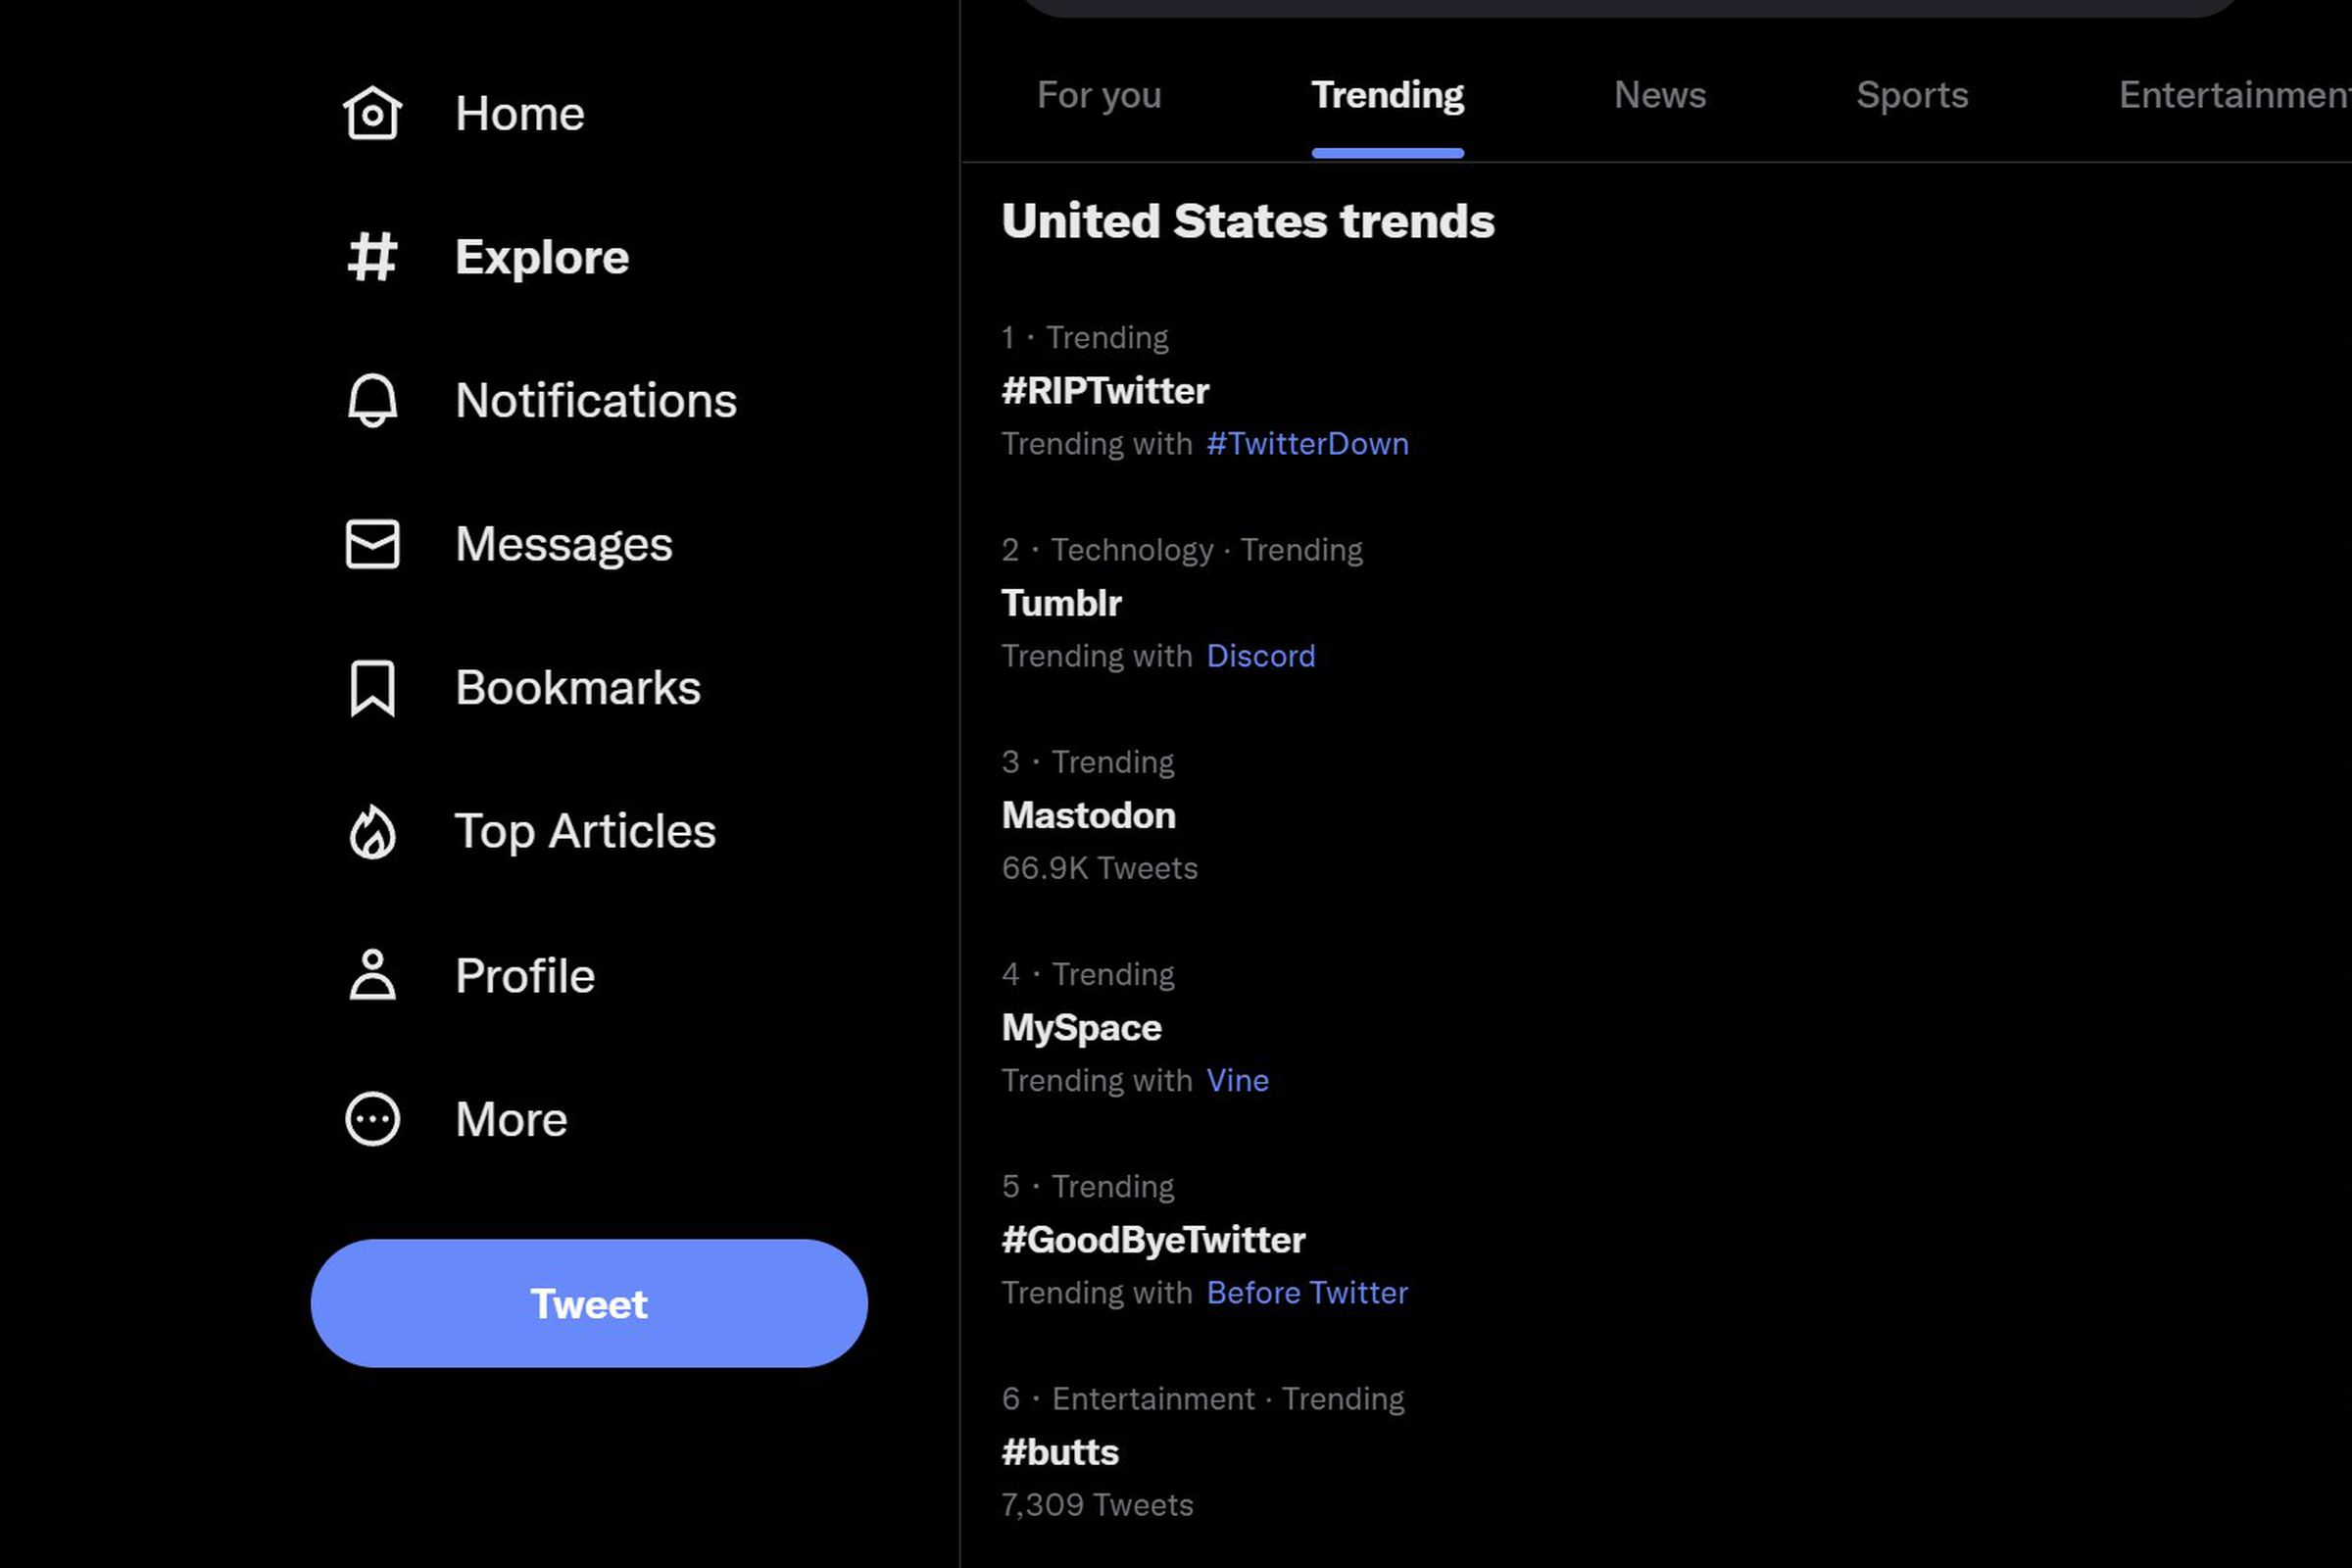 Screenshot of the Twitter trending page, with “#RIPTwitter,” “Tumblr,” “Mastodon,” “MySpace,” “#GoodByeTwitter,” and “#butts” being listed as the top topics in the US.